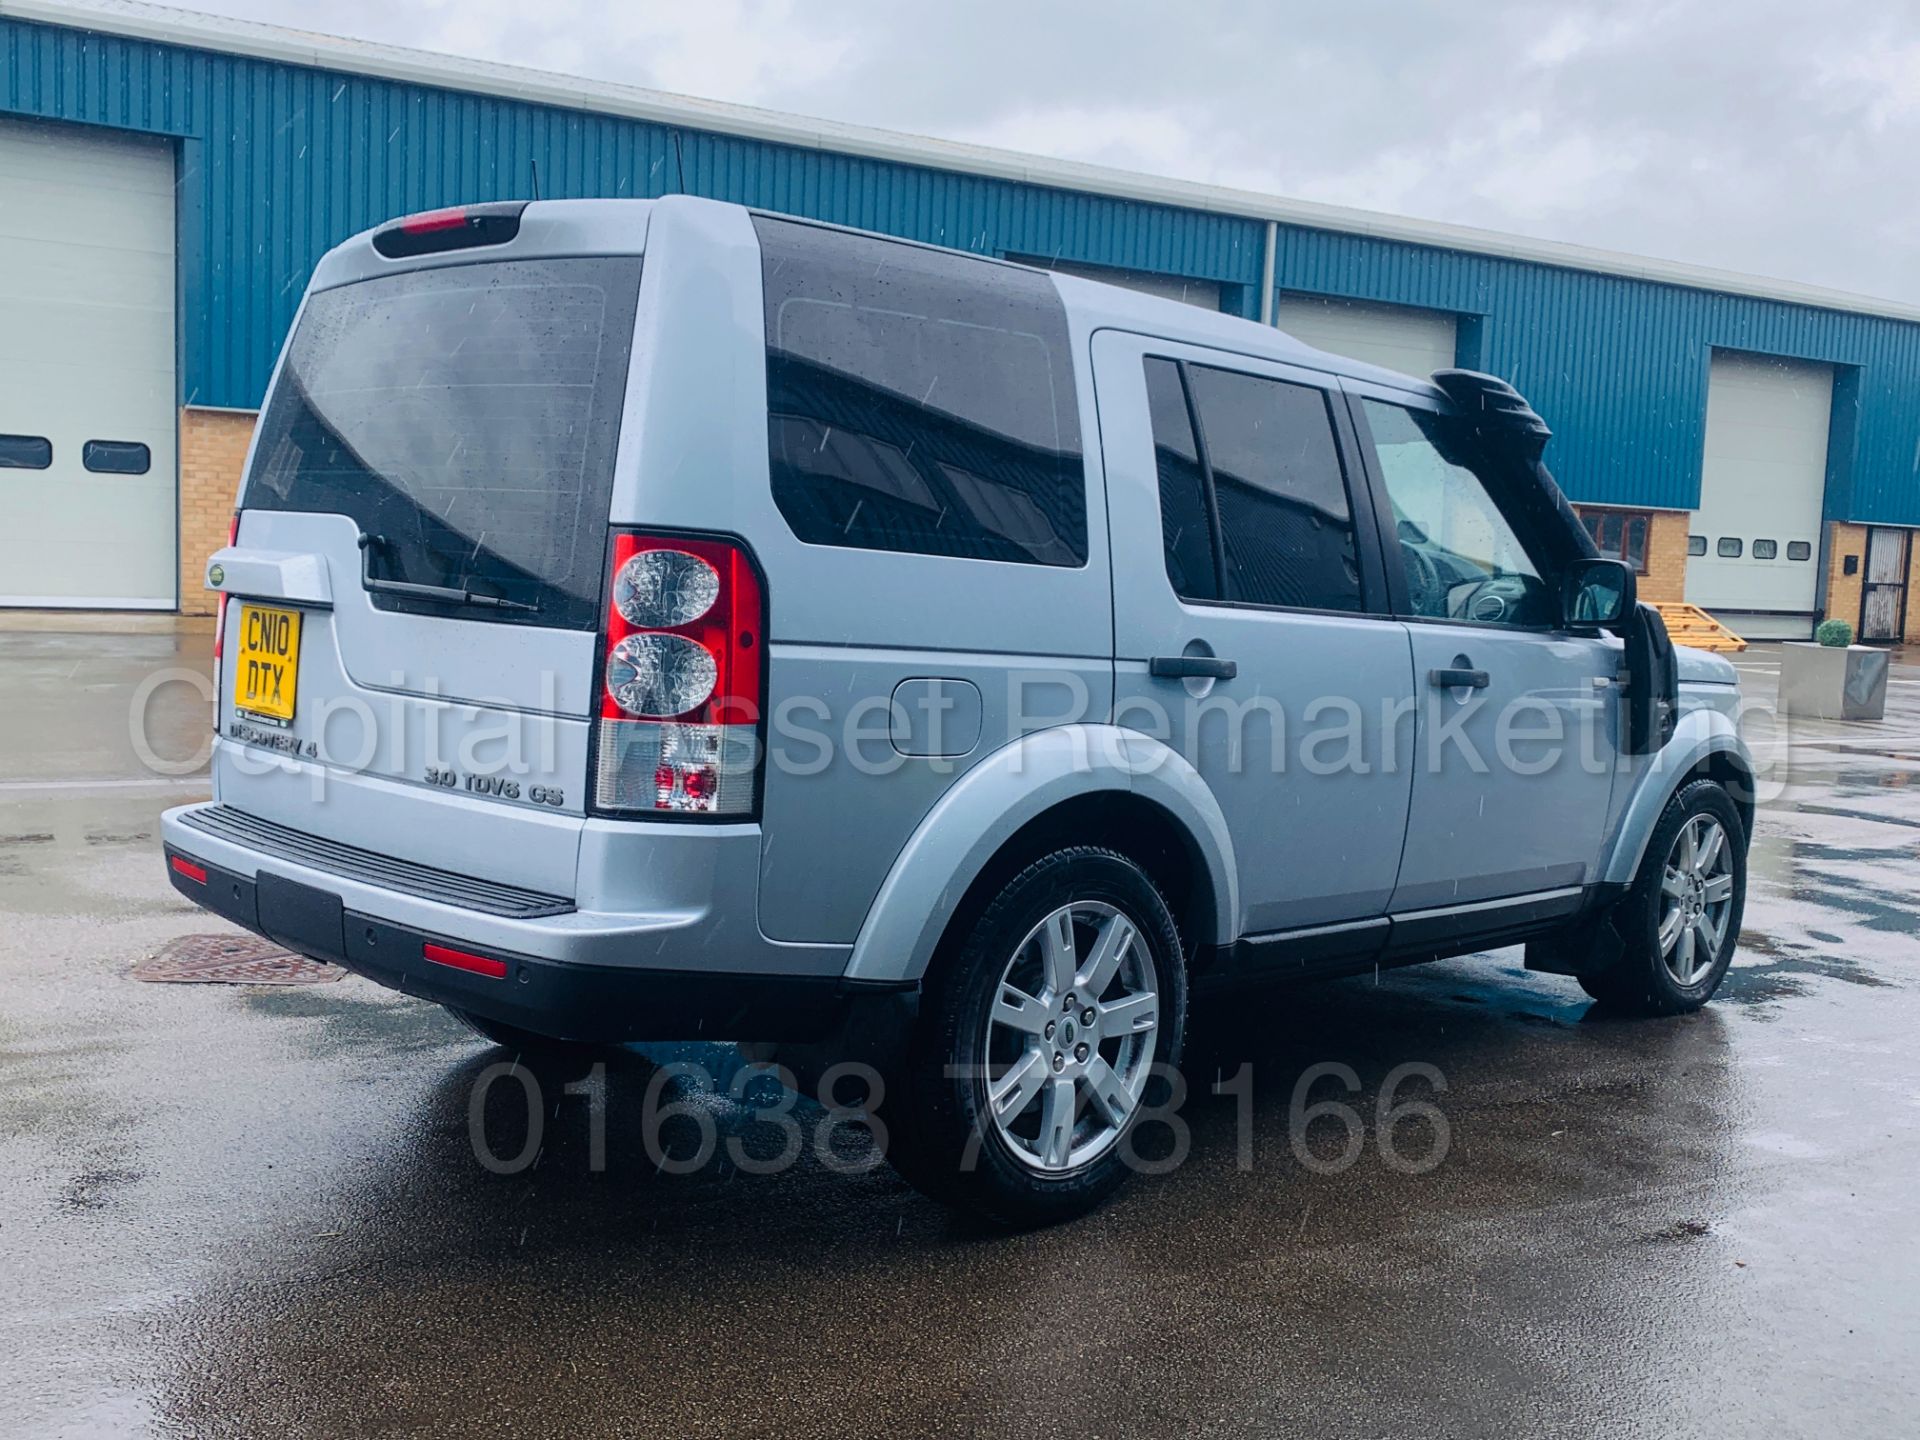 (On Sale) LAND ROVER DISCOVERY 4 *GS EDITION* SUV (2010) '3.0 TDV6 - 190 BHP - AUTO' **HUGE SPEC** - Image 12 of 45